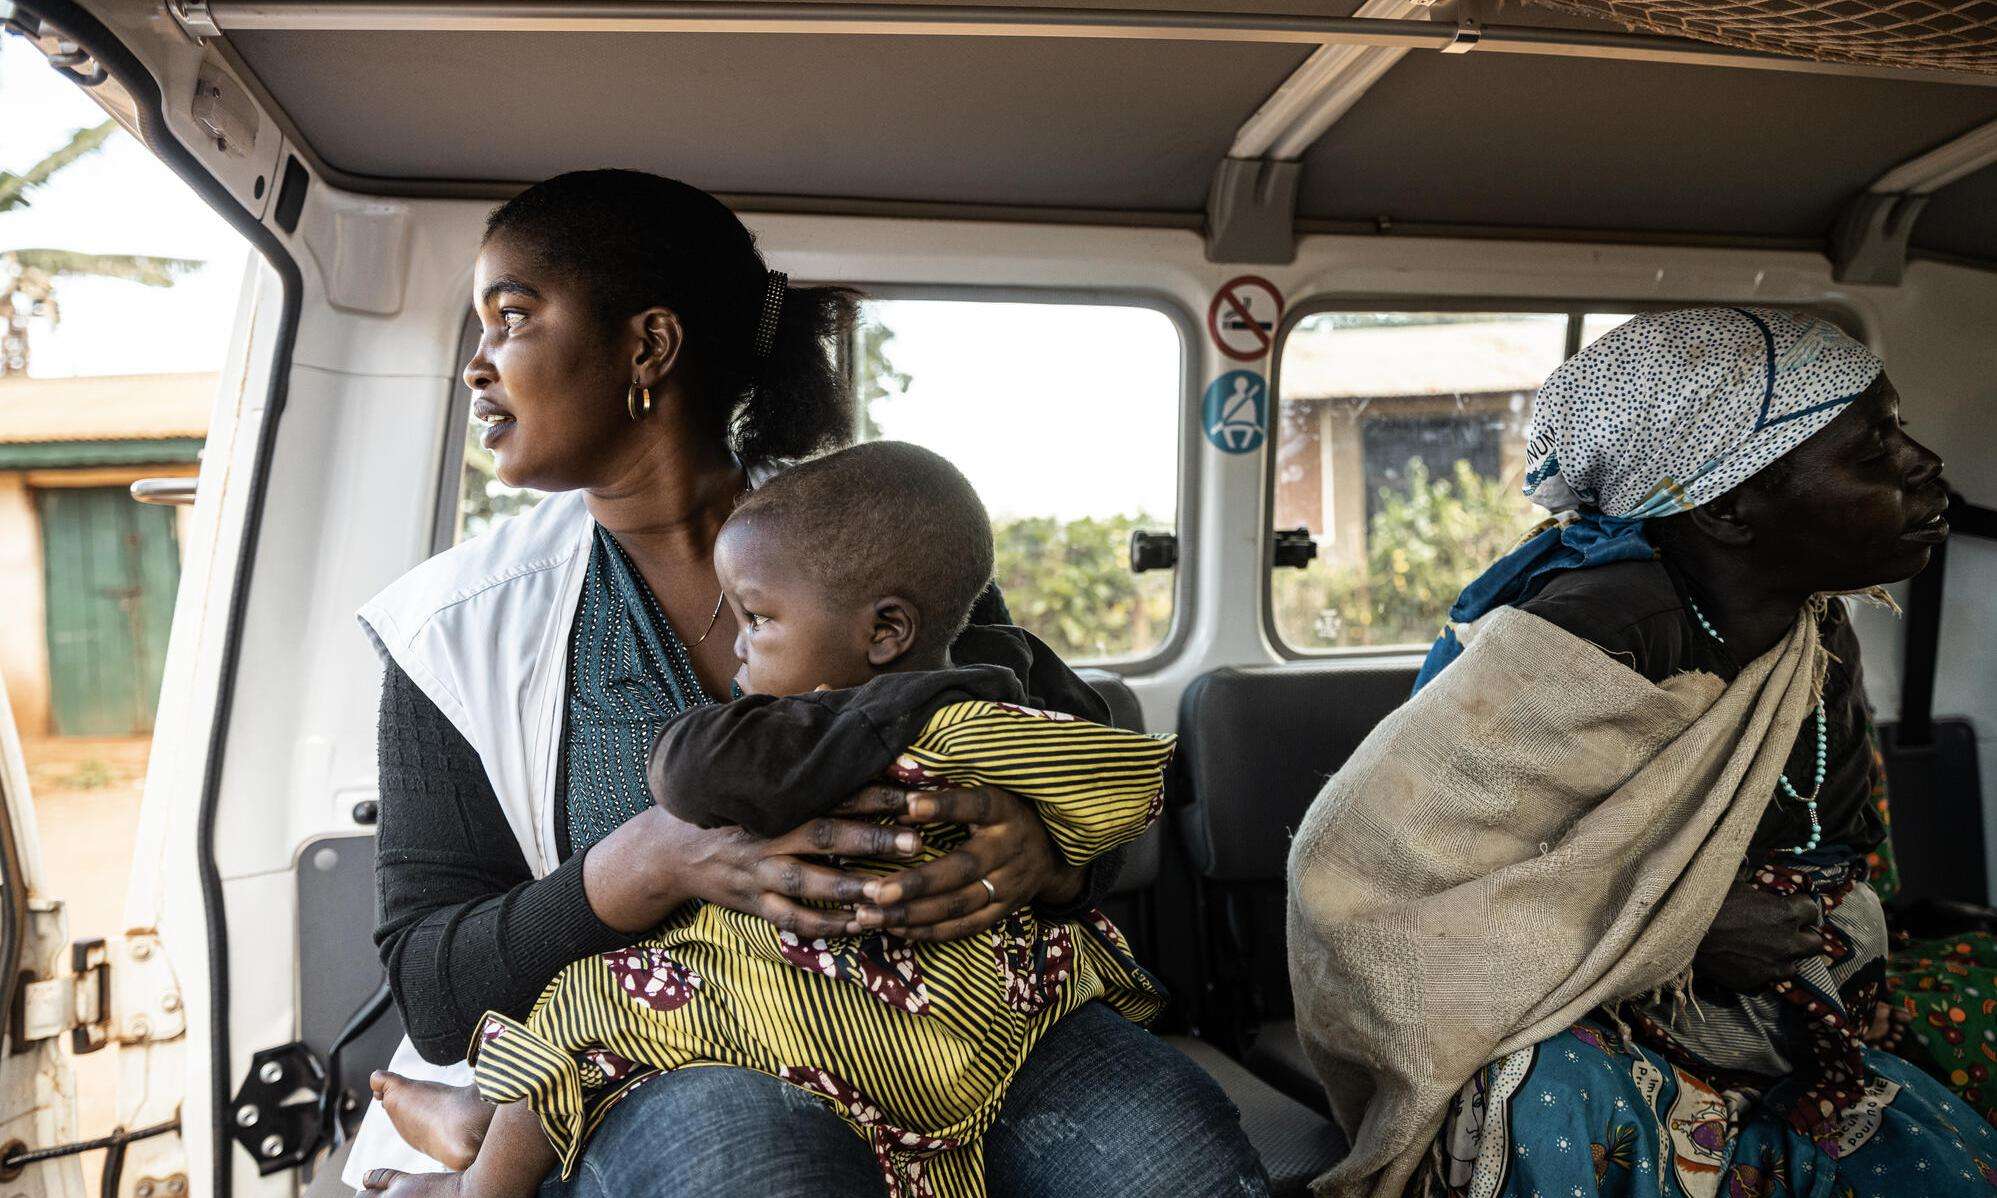 A woman and child sit in a vehicle in Ituri province, Democratic Republic of Congo (DRC)